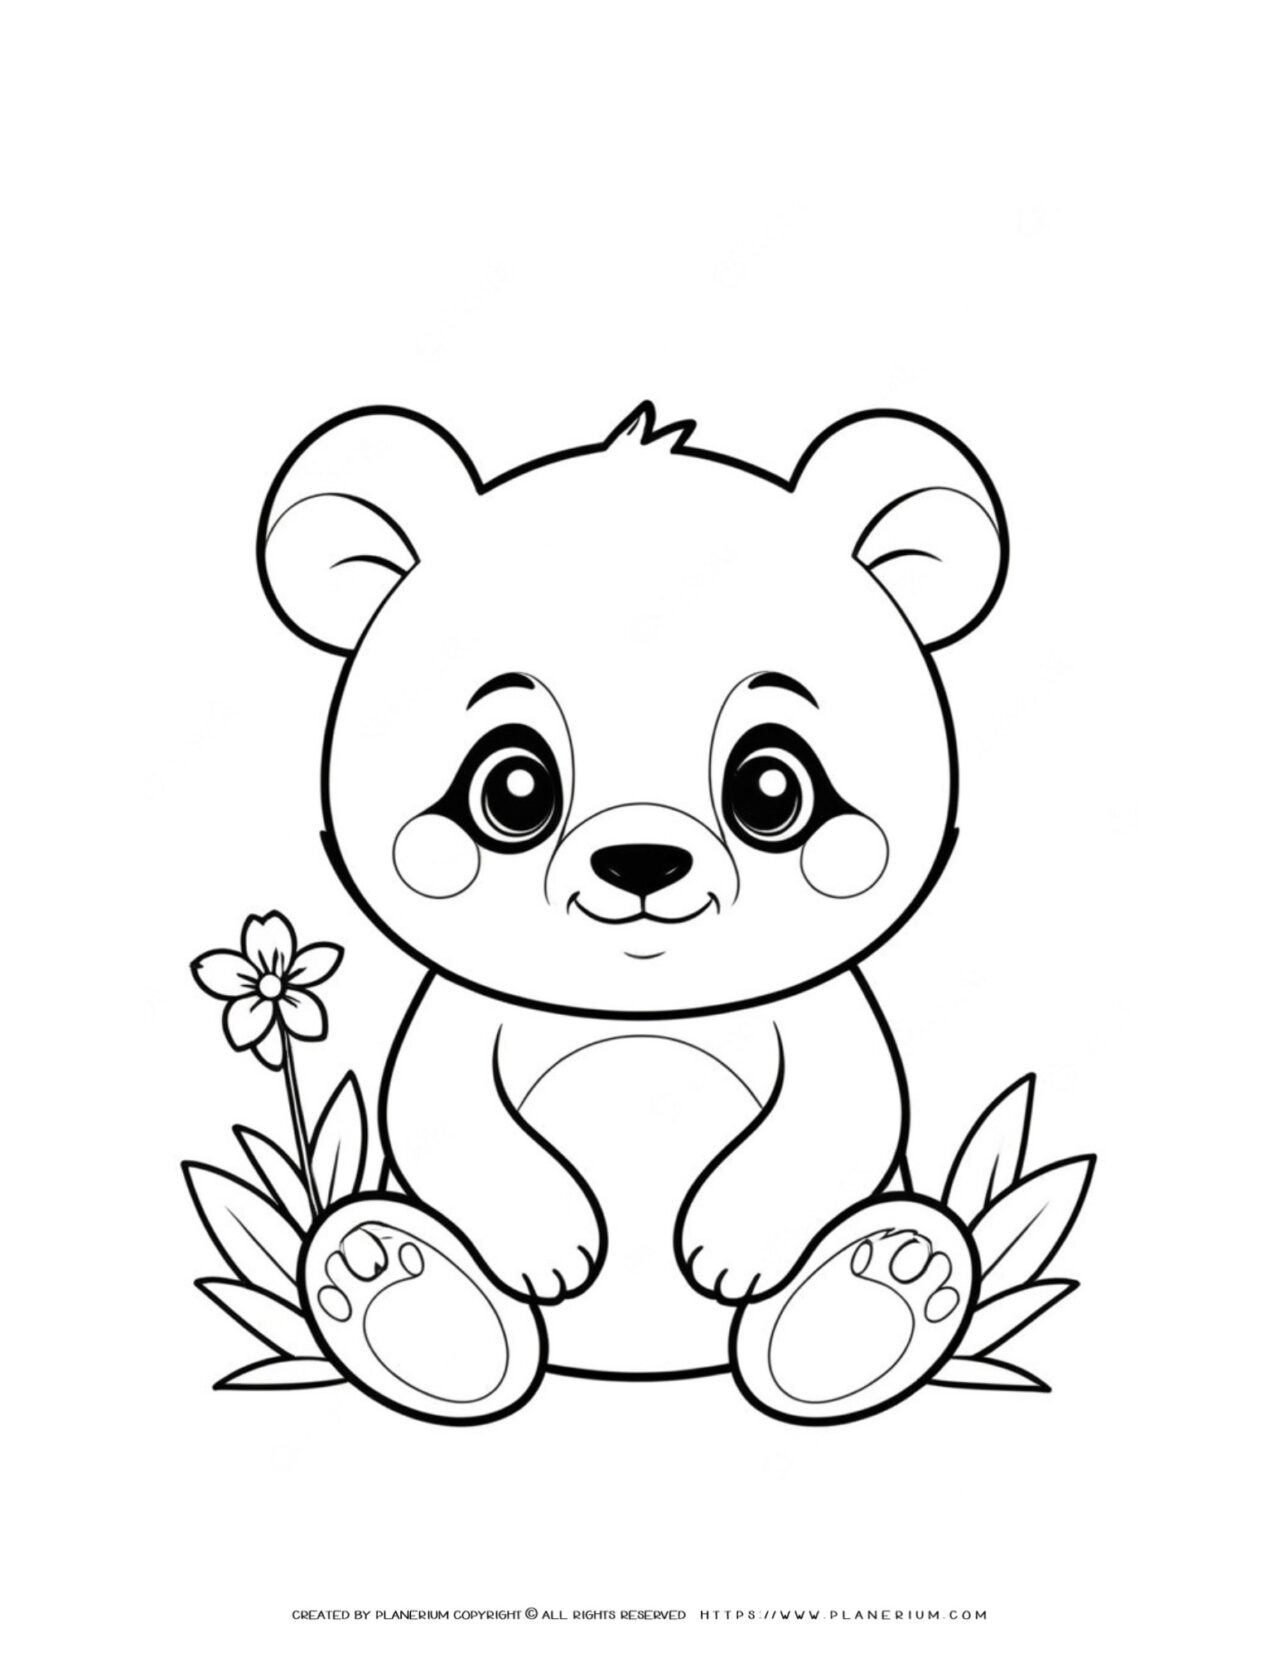 cute-panda-drawing-coloring-page-for-kids